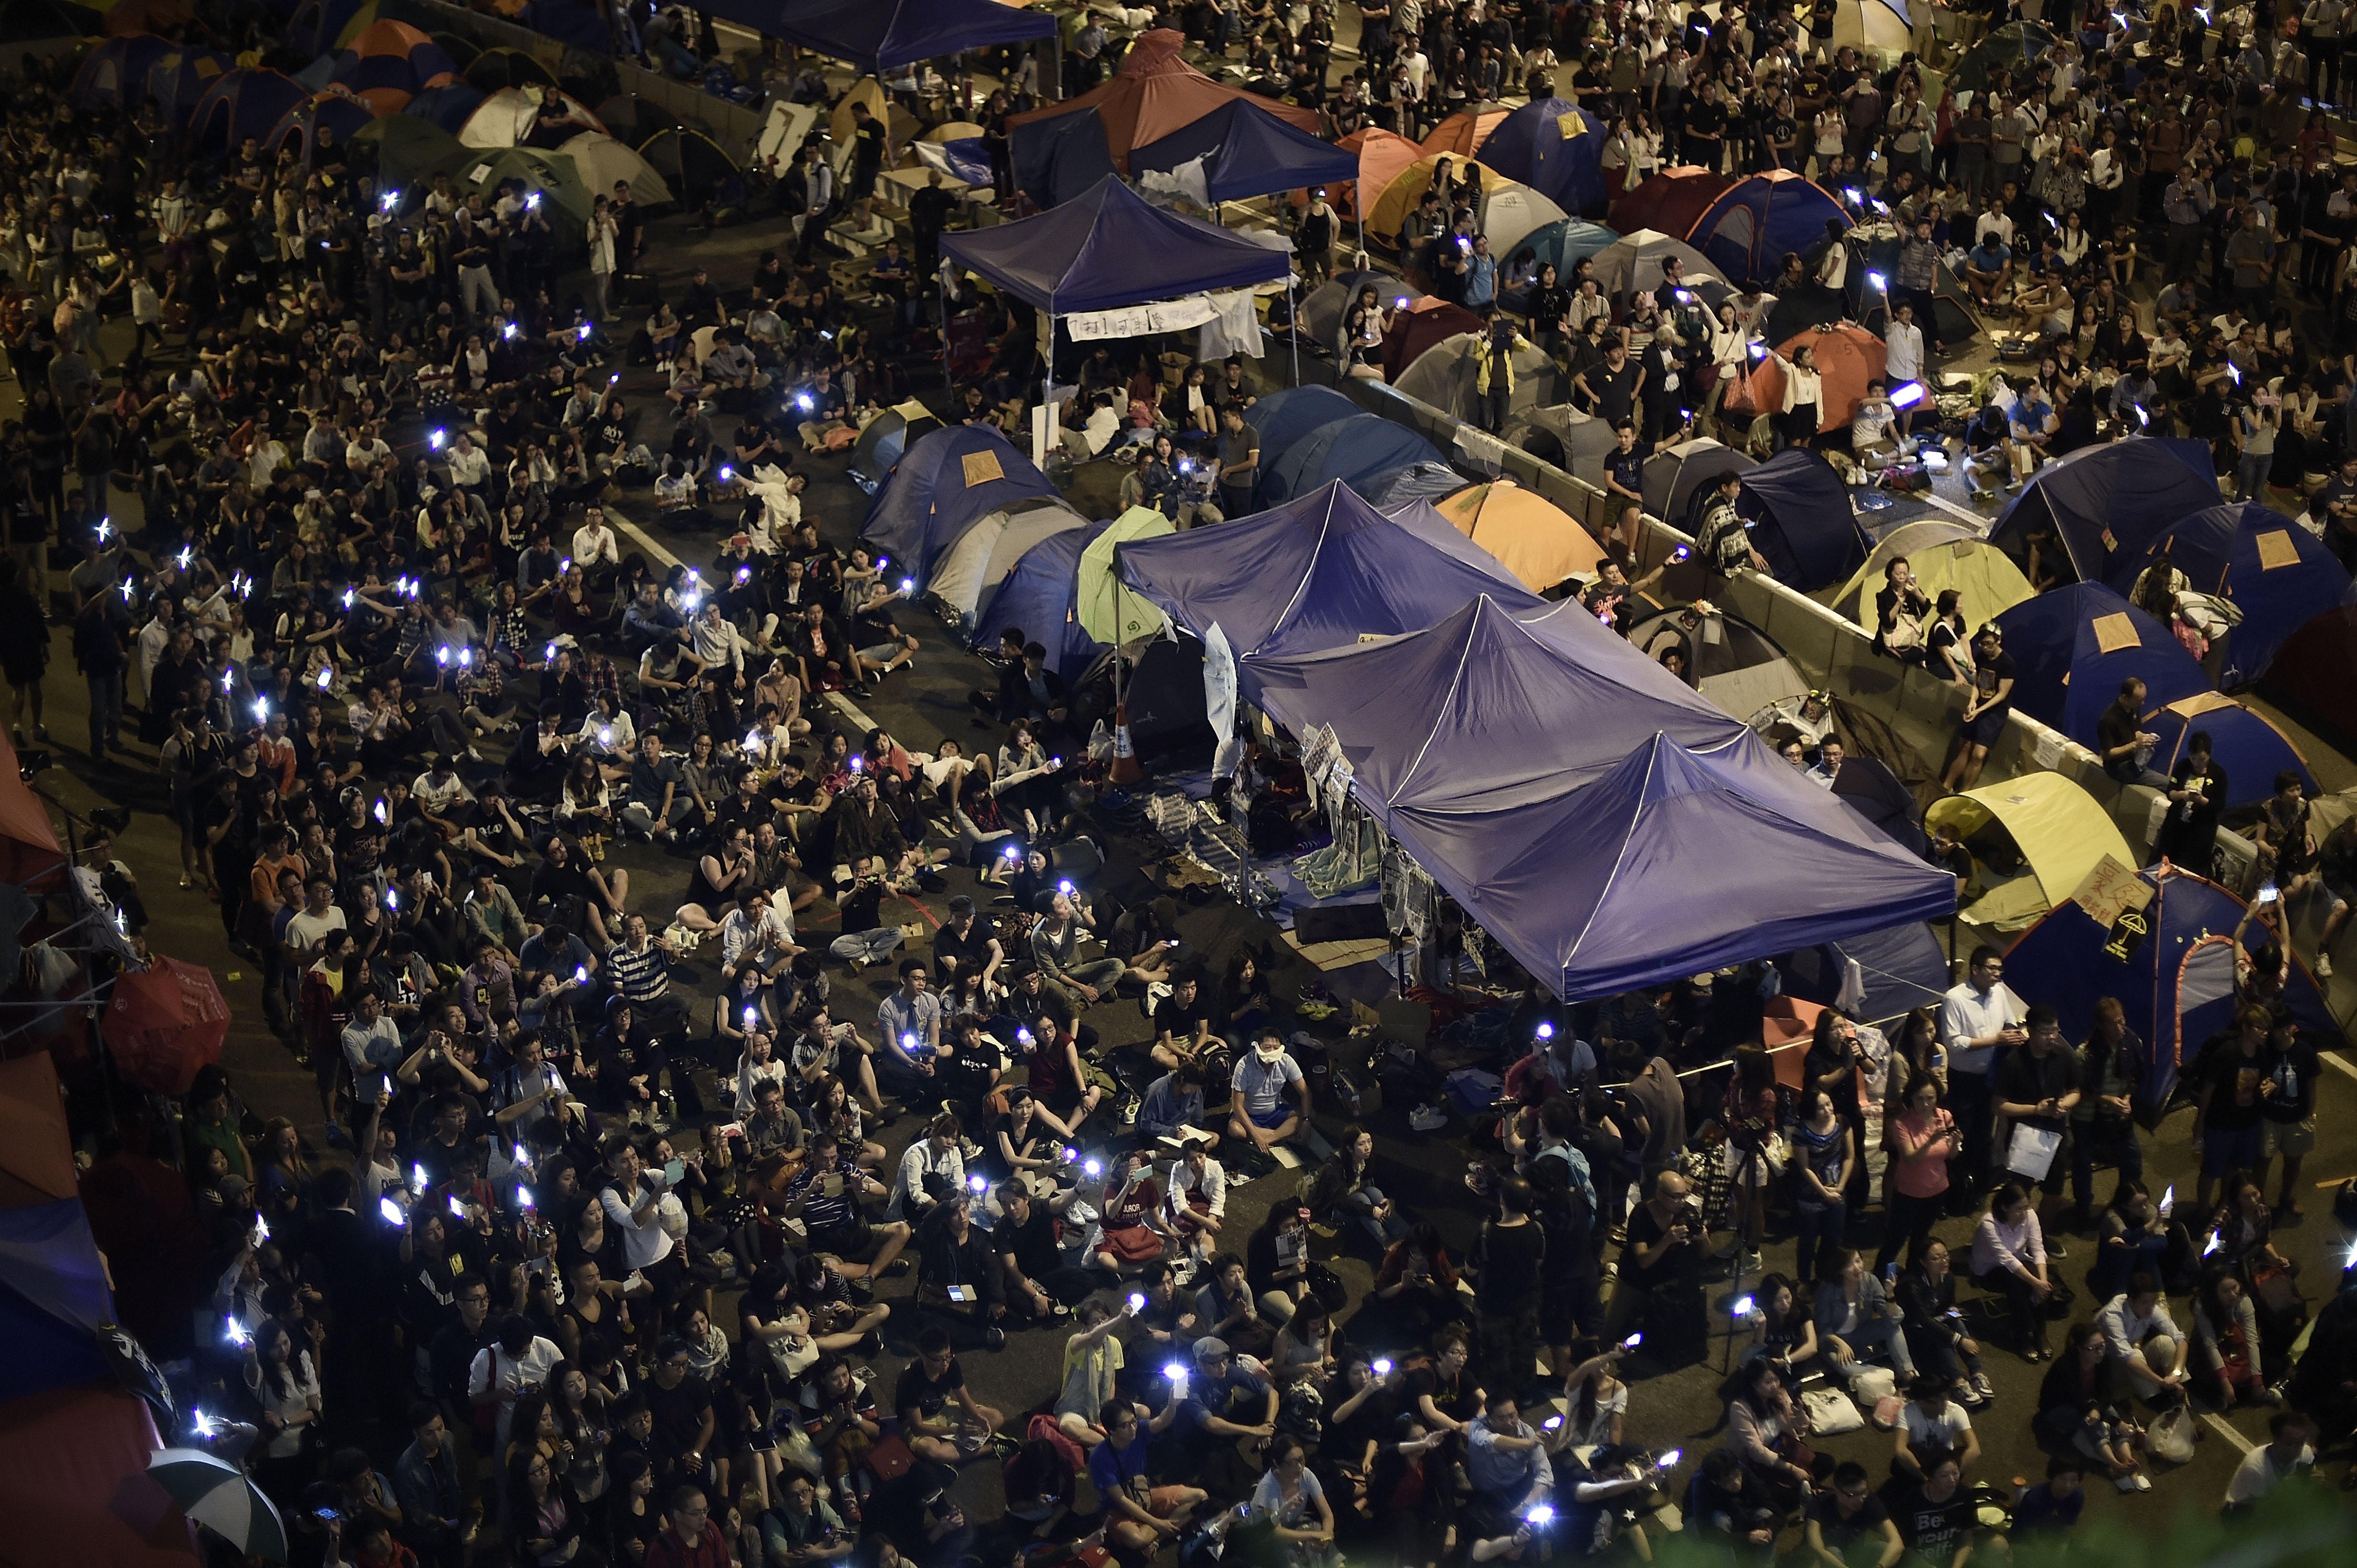 On October 16, 2014 in Hong Kong, pro-democracy protesters continue to call for open elections and the resignation of Hong Kong's Chief Executive Leung Chun-ying. (Alexander Koerner—Getty Images)